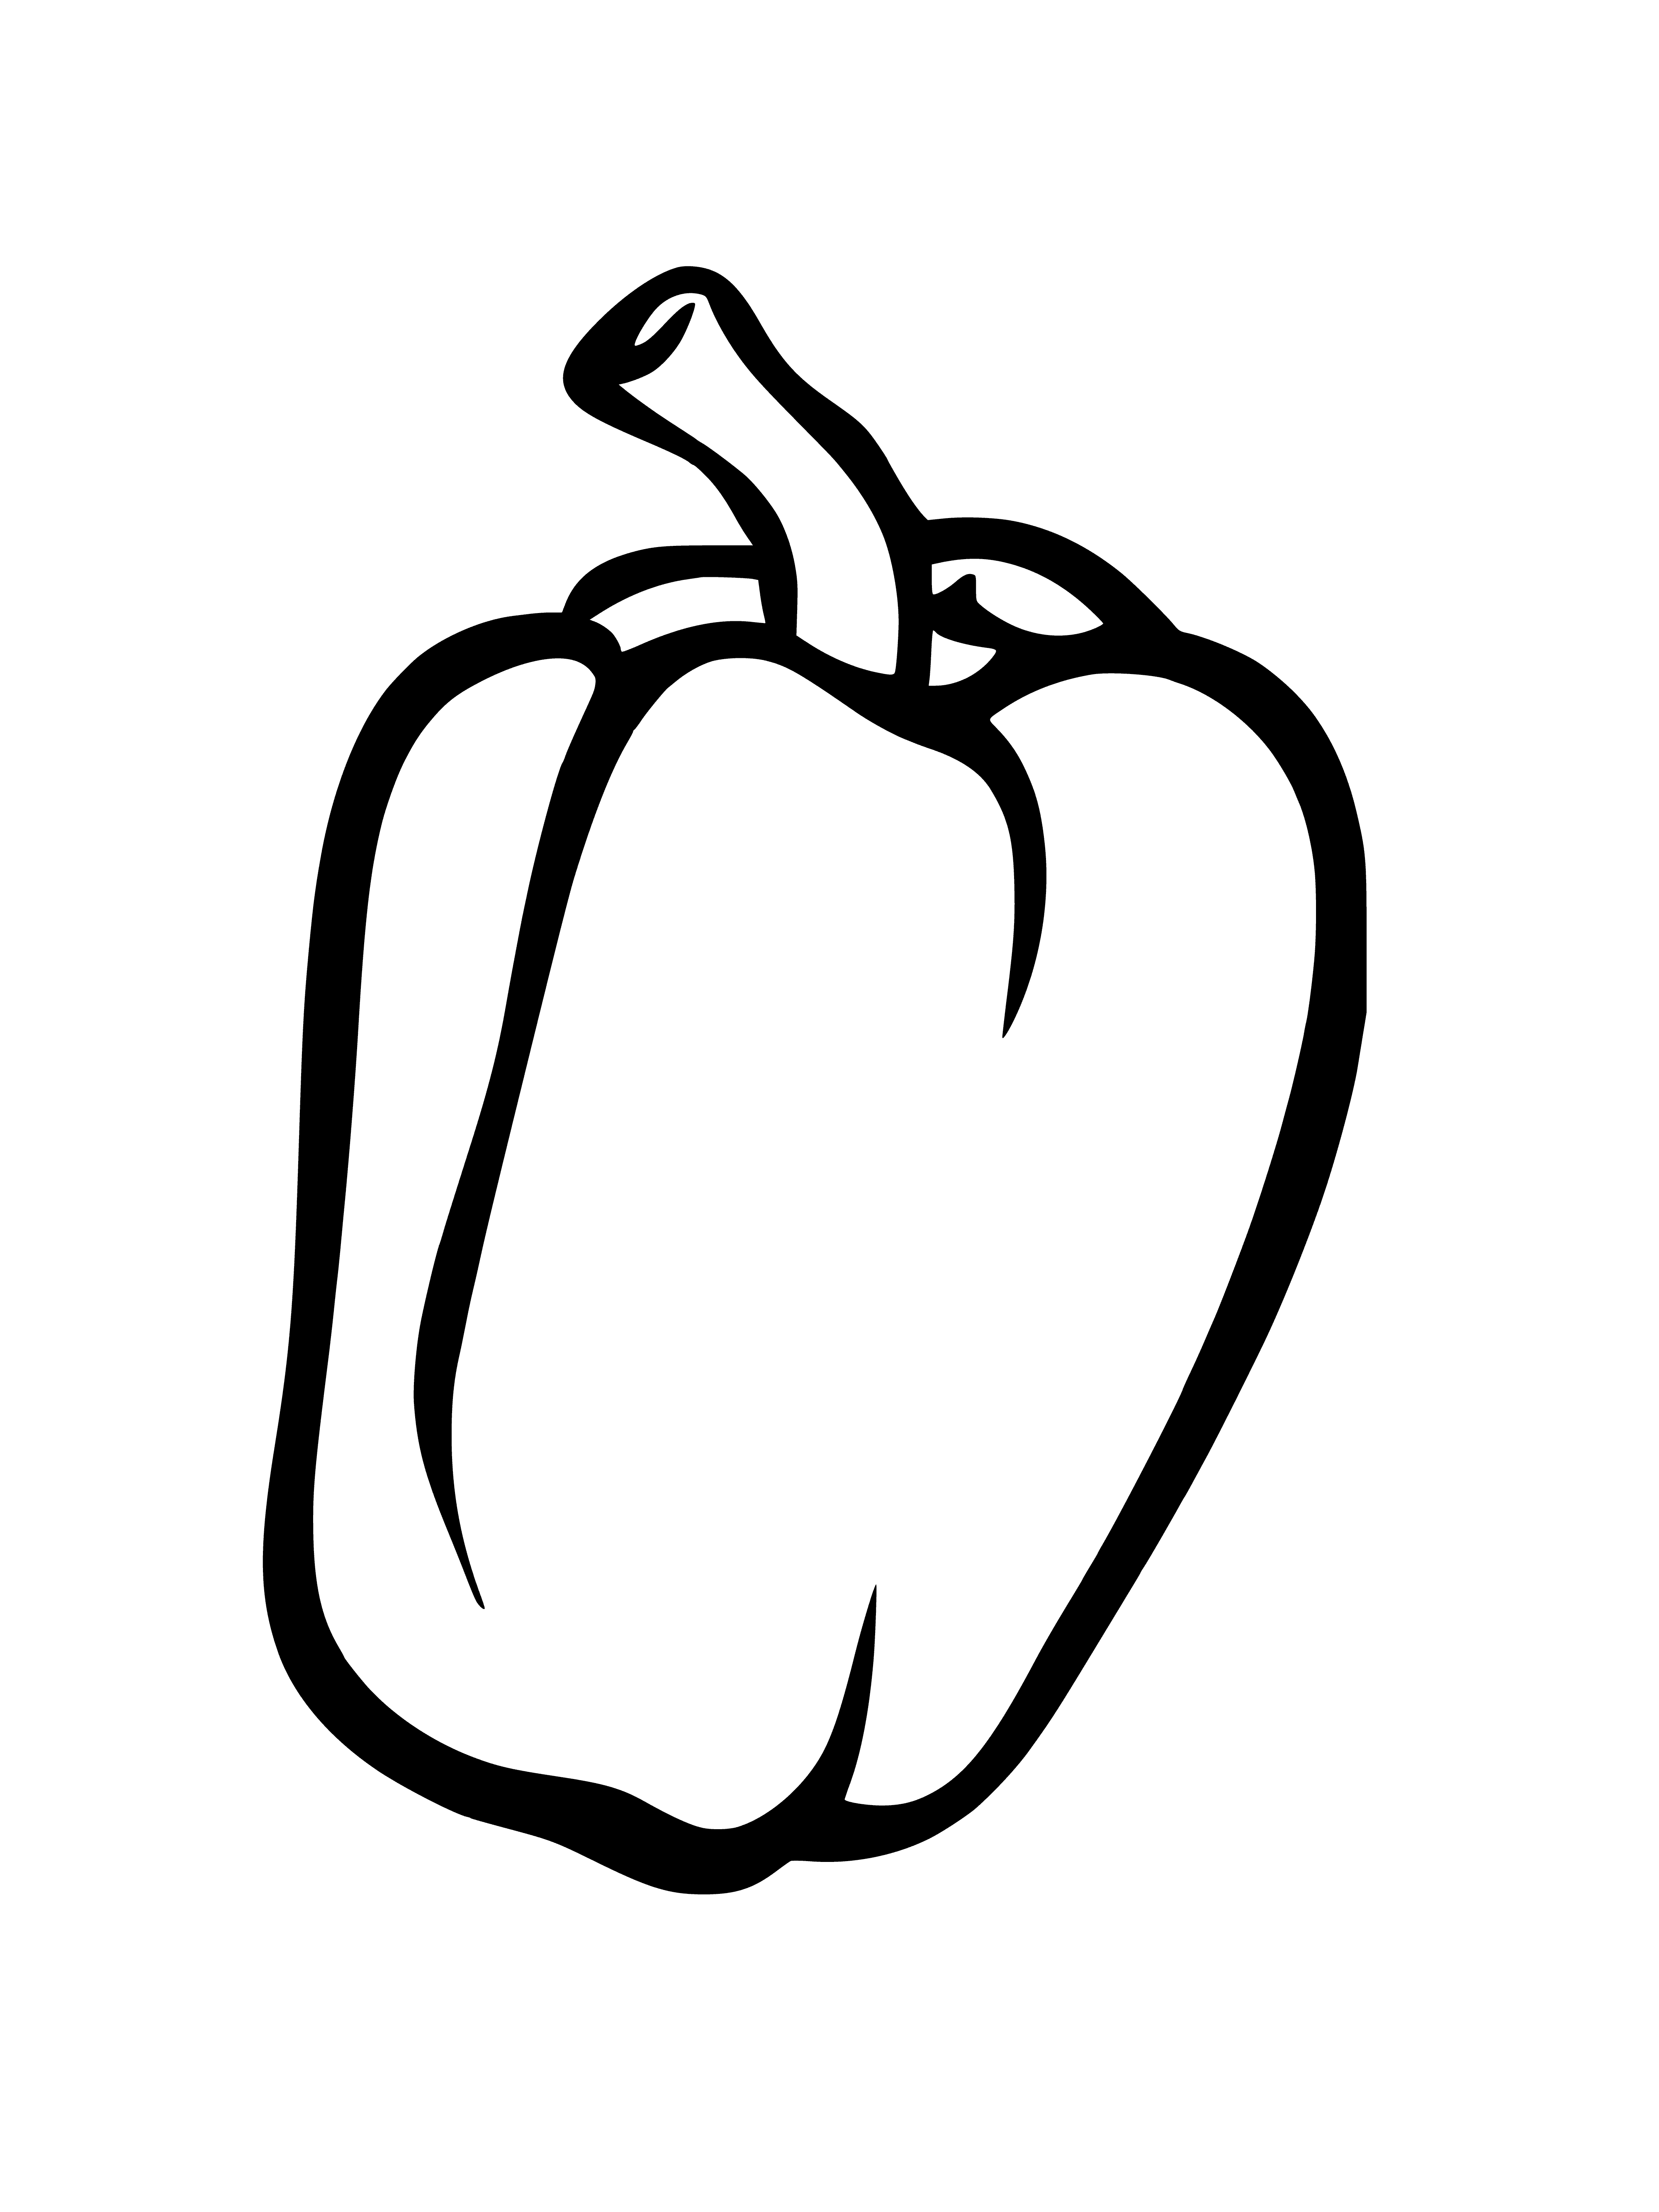 coloring page: Coloring page of red bell pepper with smooth, shiny surface, long green stem, and curved bottom. #coloring #veggiedrawing